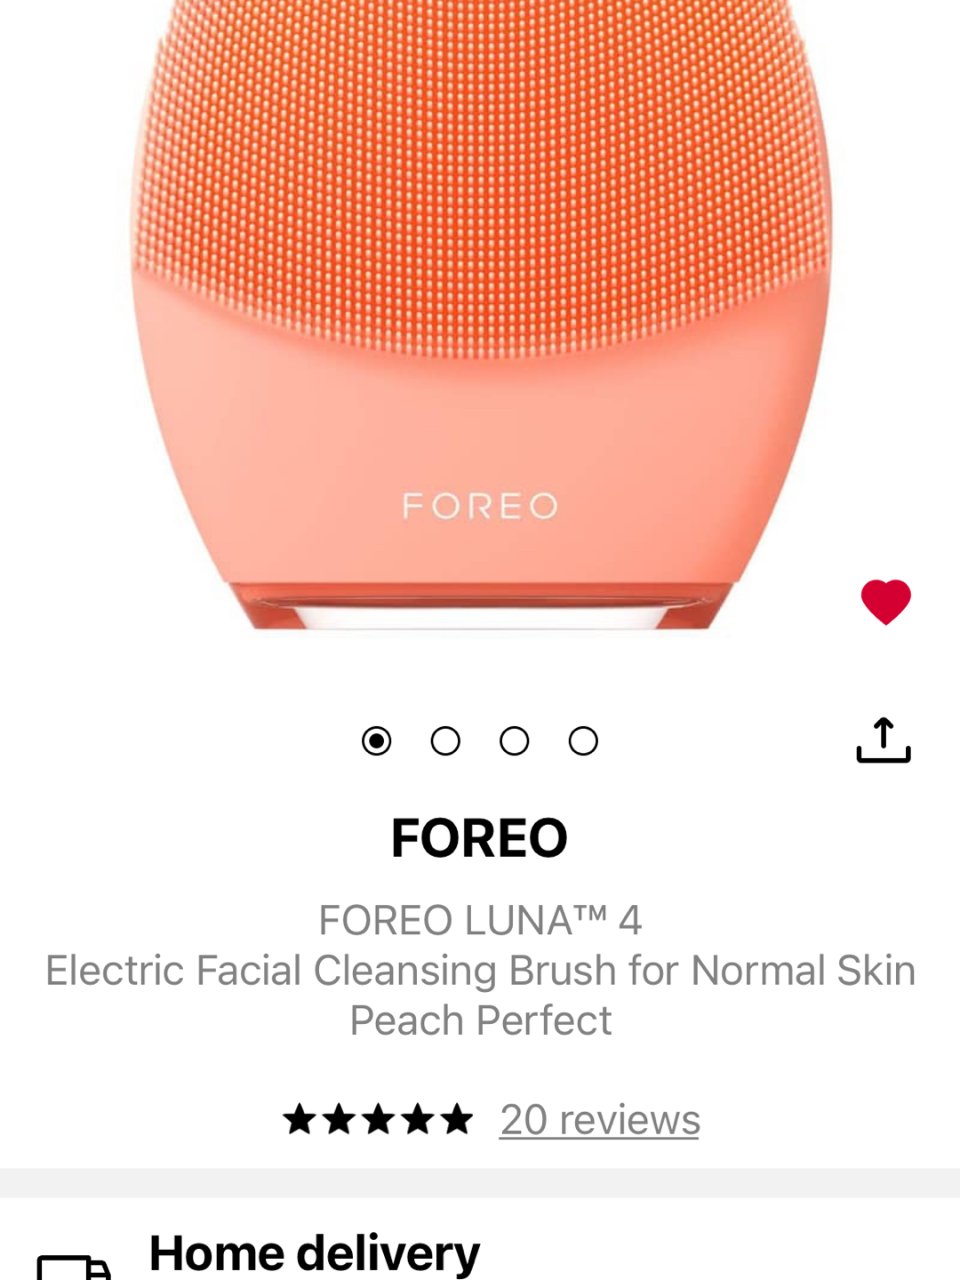 FOREO 斐珞尔,FOREO LUNA™ 4 - Electric Facial Cleansing Brush for Normal Skin Peach Perfect